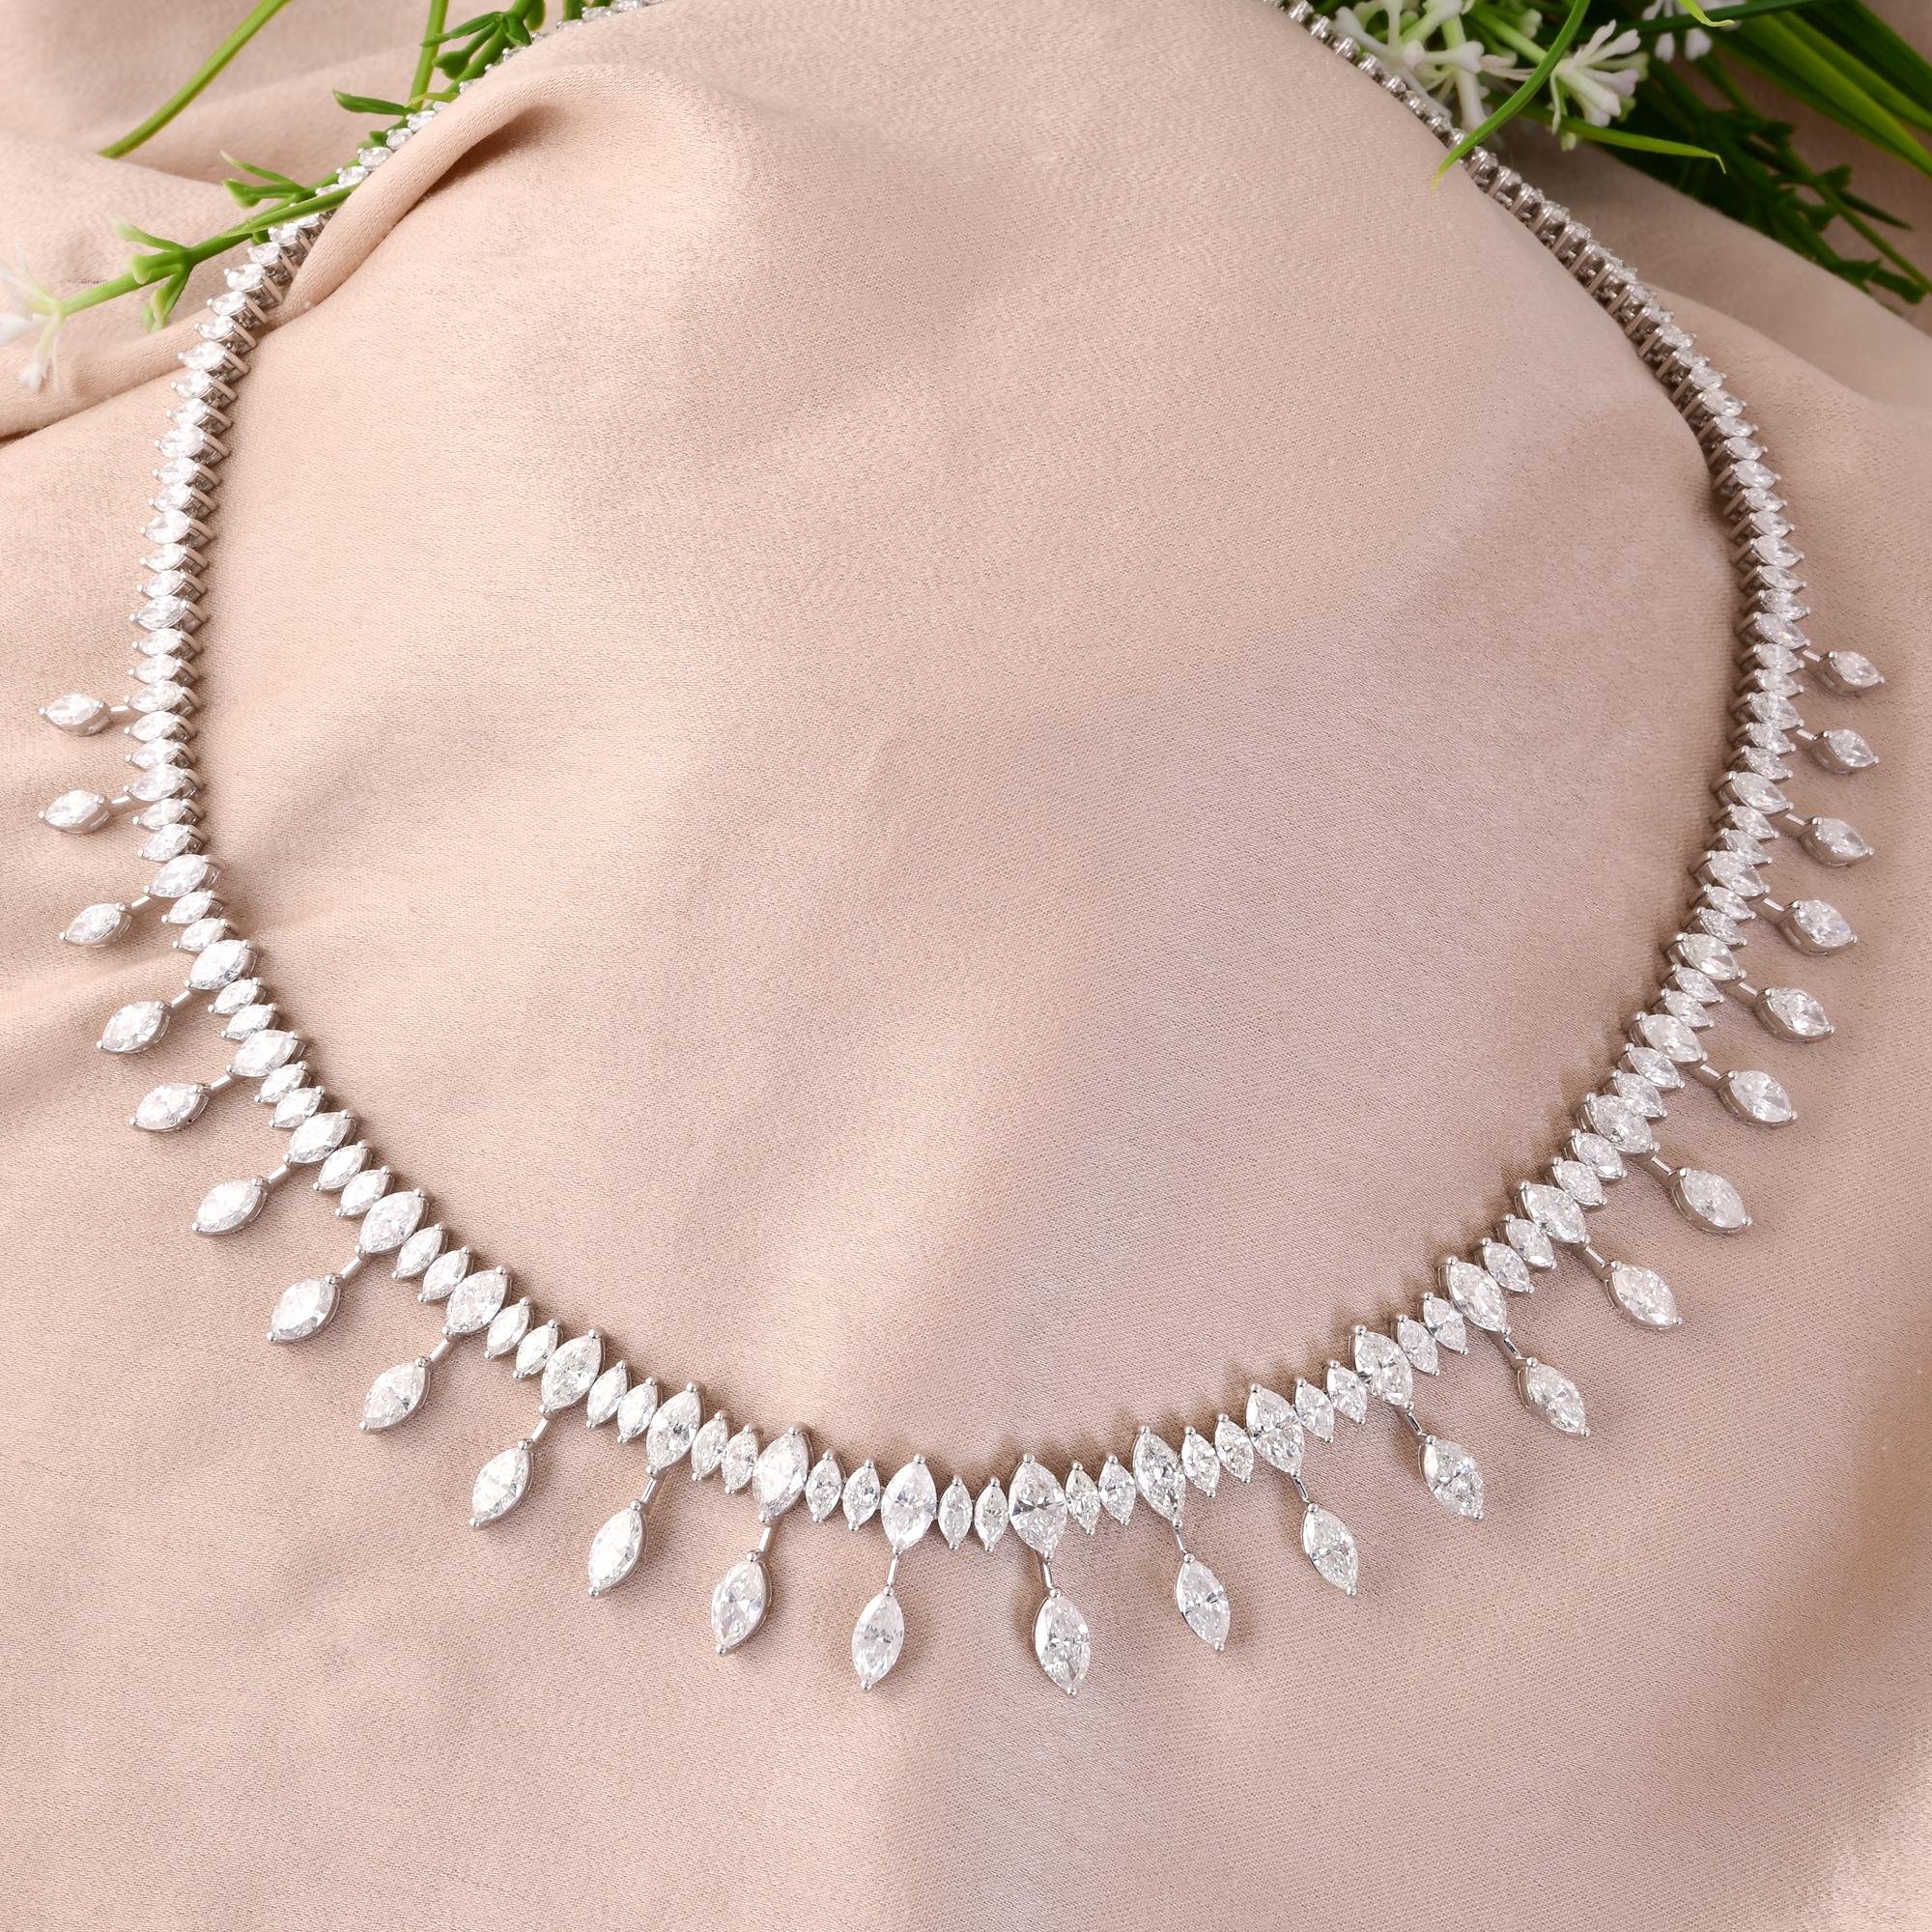 Modern Natural 26.36 Carat Marquise Diamond Choker Necklace 18 Karat White Gold Jewelry For Sale